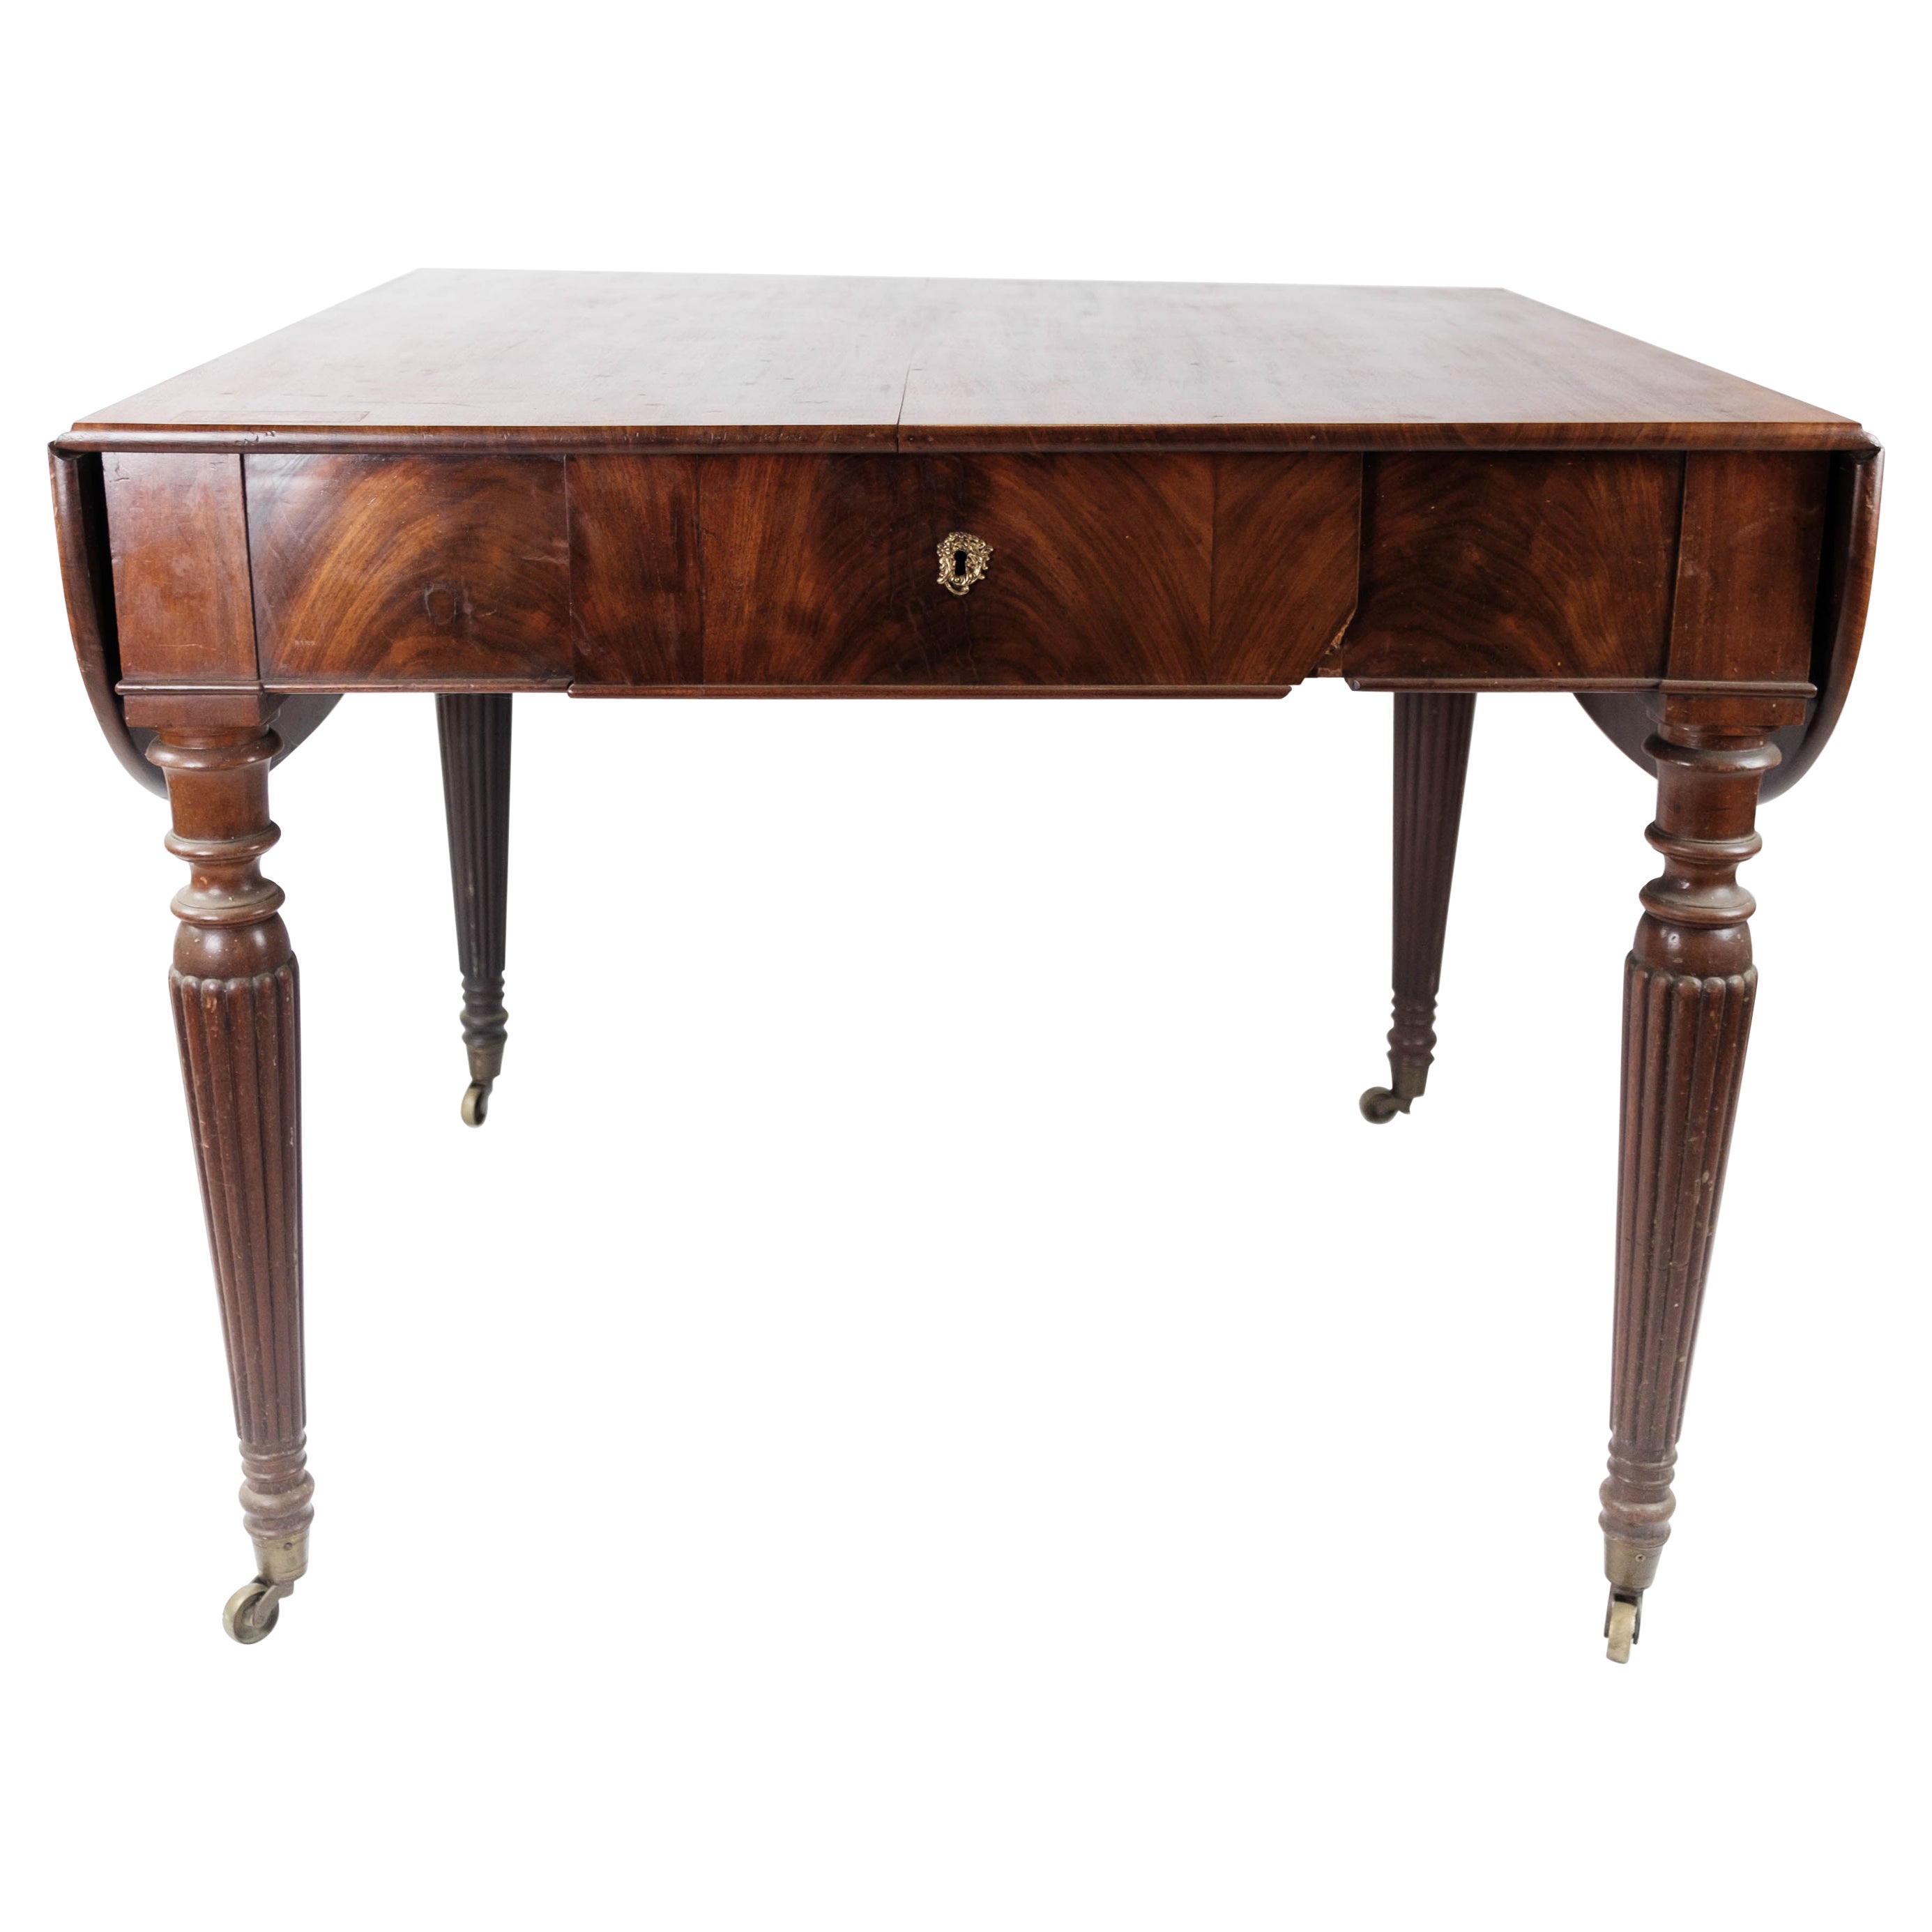 Dining Table of Mahogany with Extension Plates, 1840s